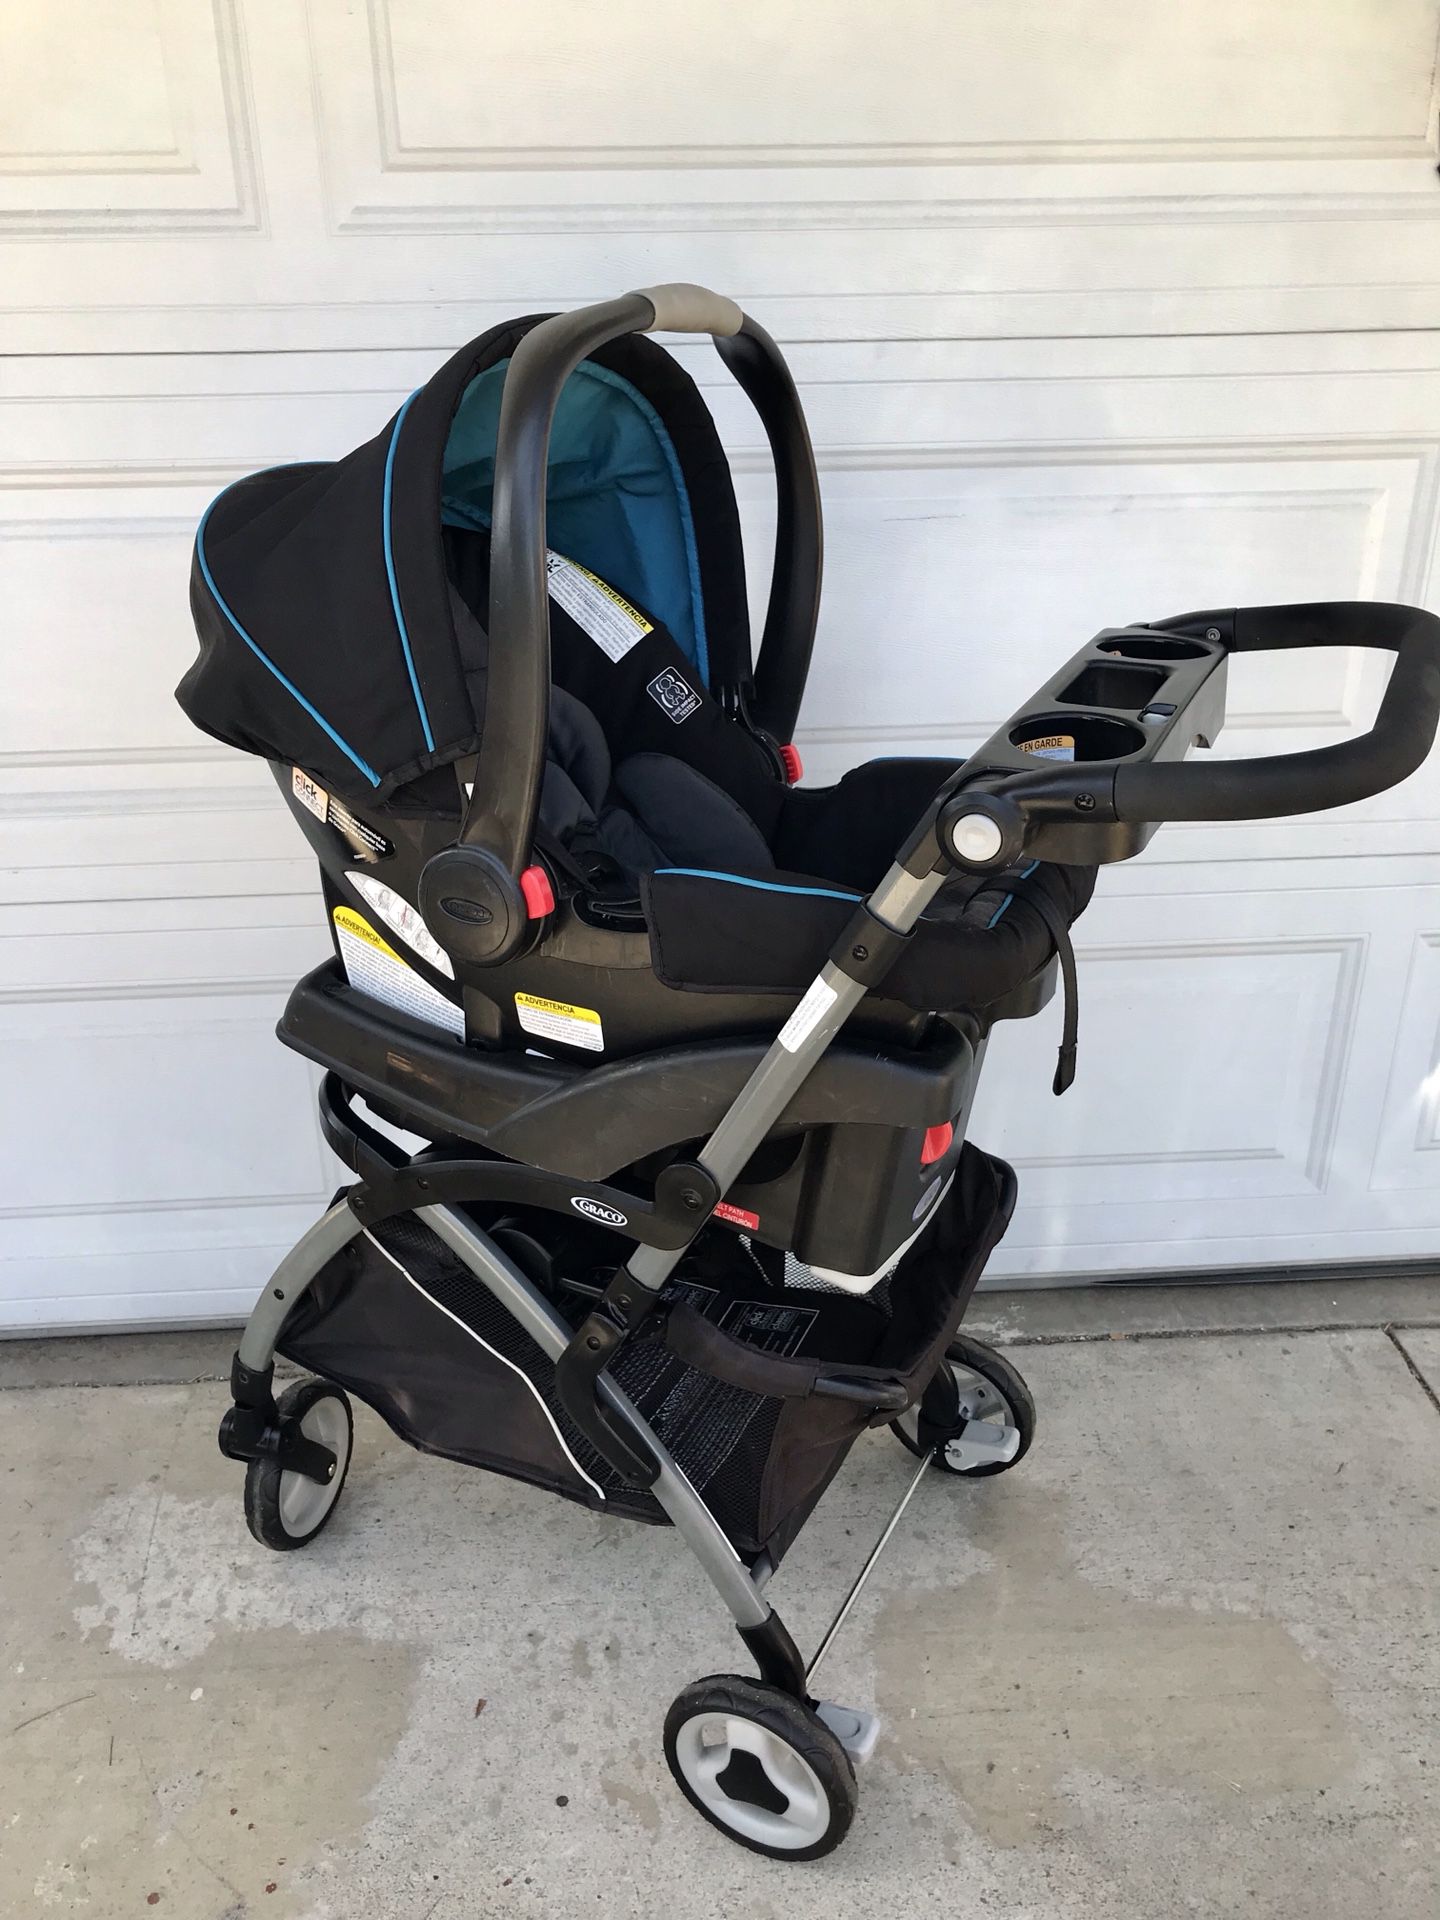 GRACO SNUGRIDE INFANT CAR SEAT AND CADDY STROLLER!!!!